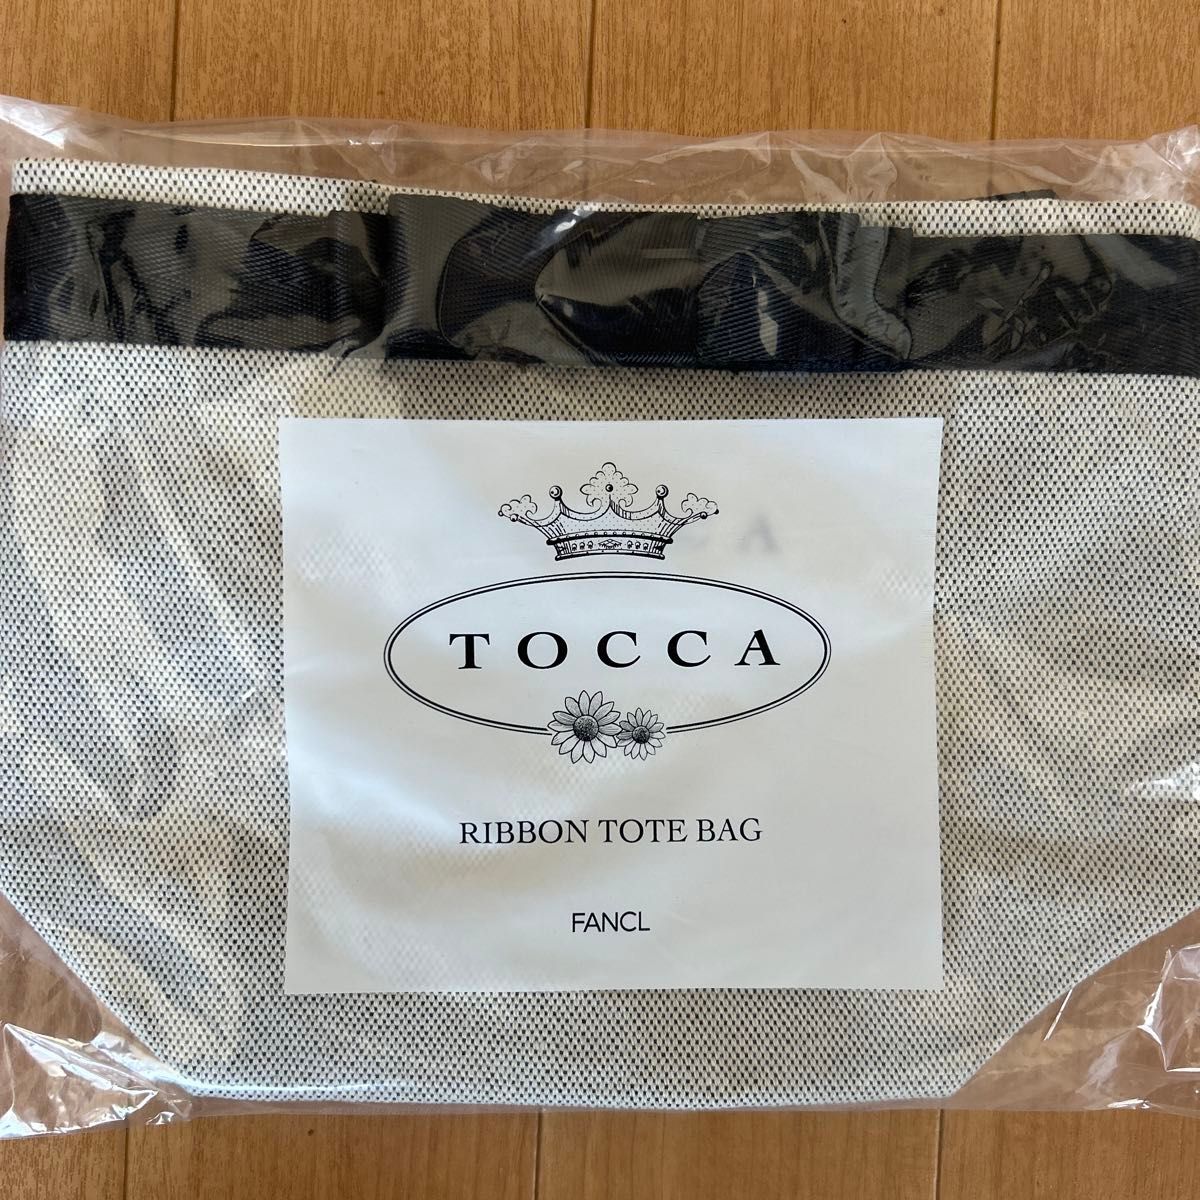 TOCCA リボントートバッグ